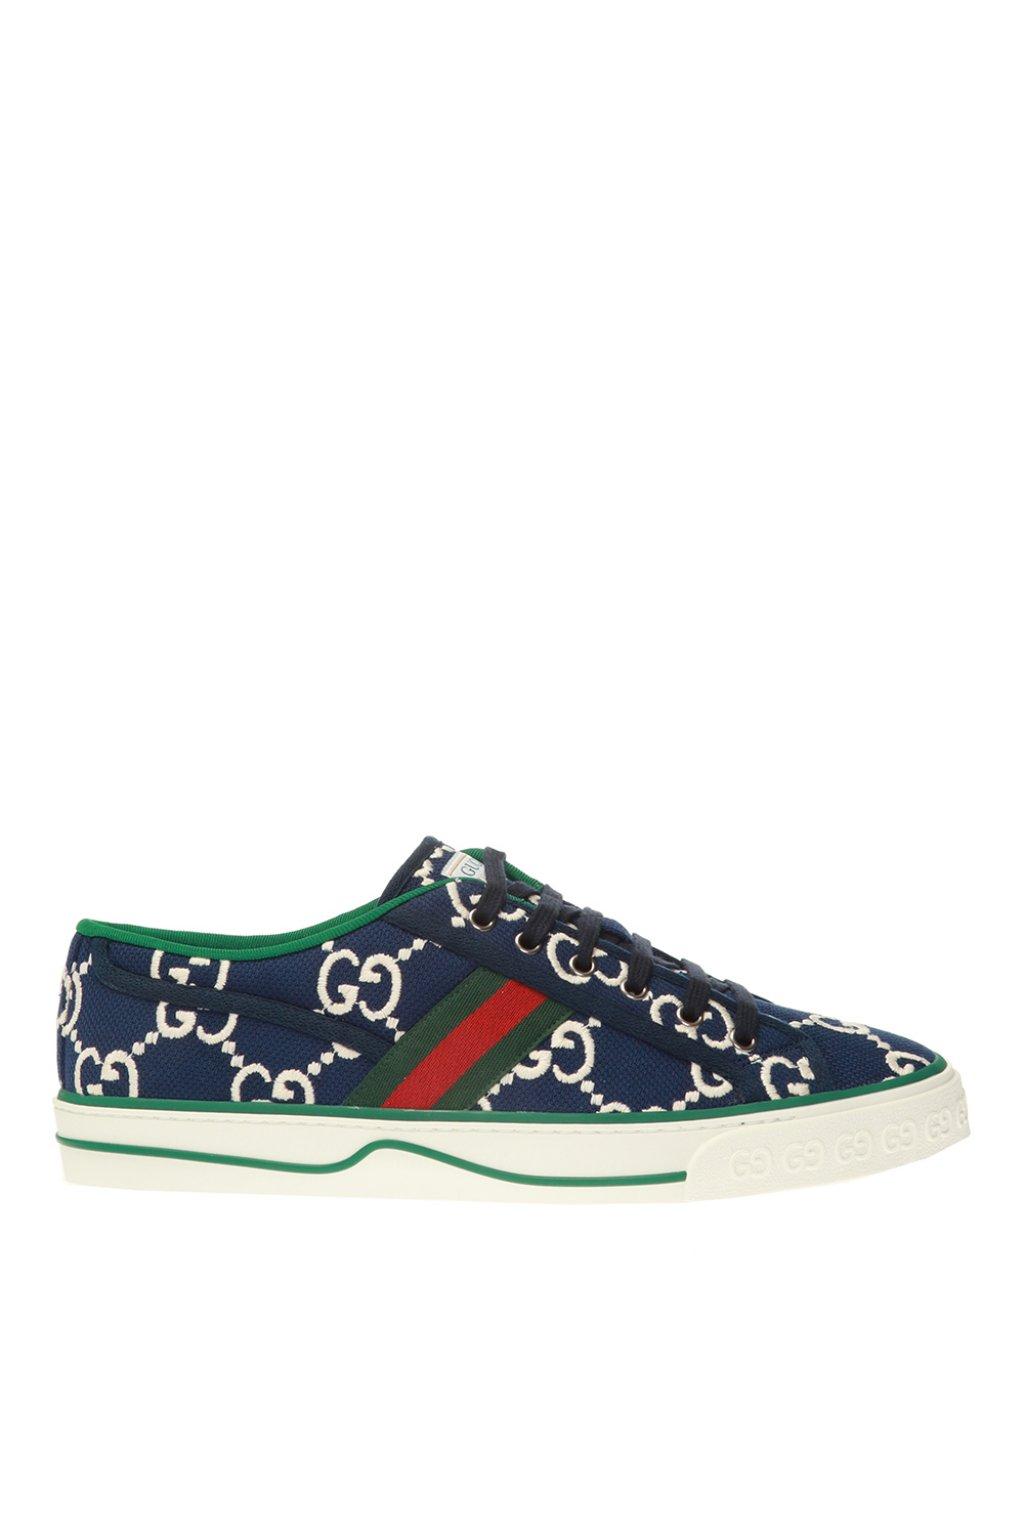 gucci sneakers navy blue